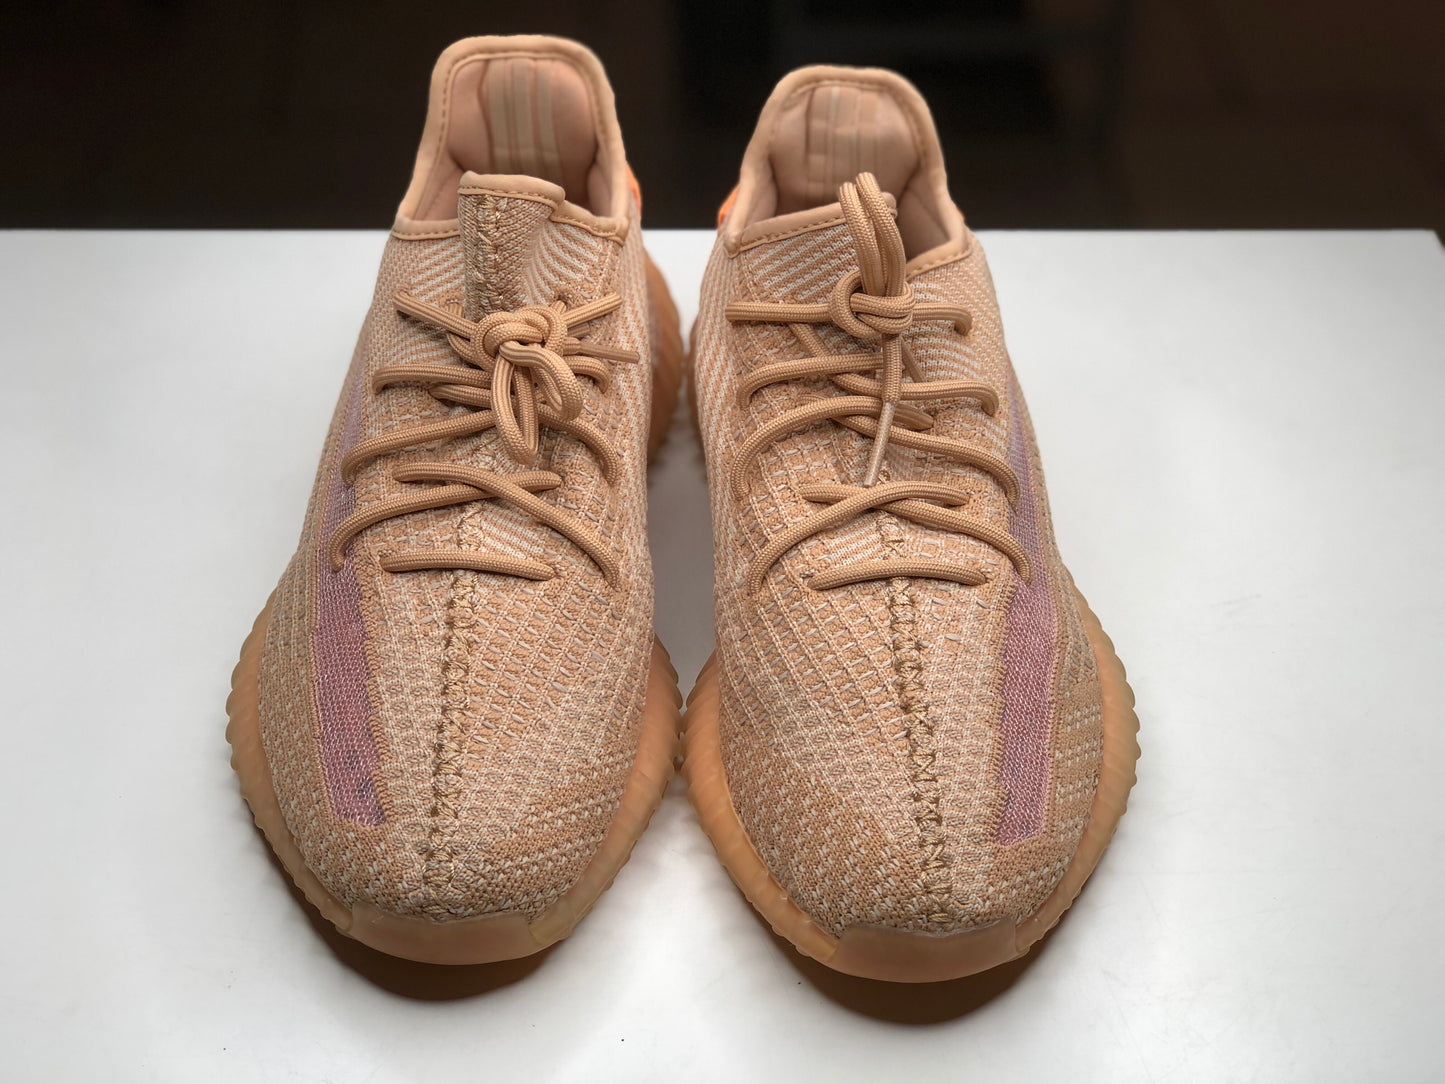 Yeezy Boost 350 Clay size 11